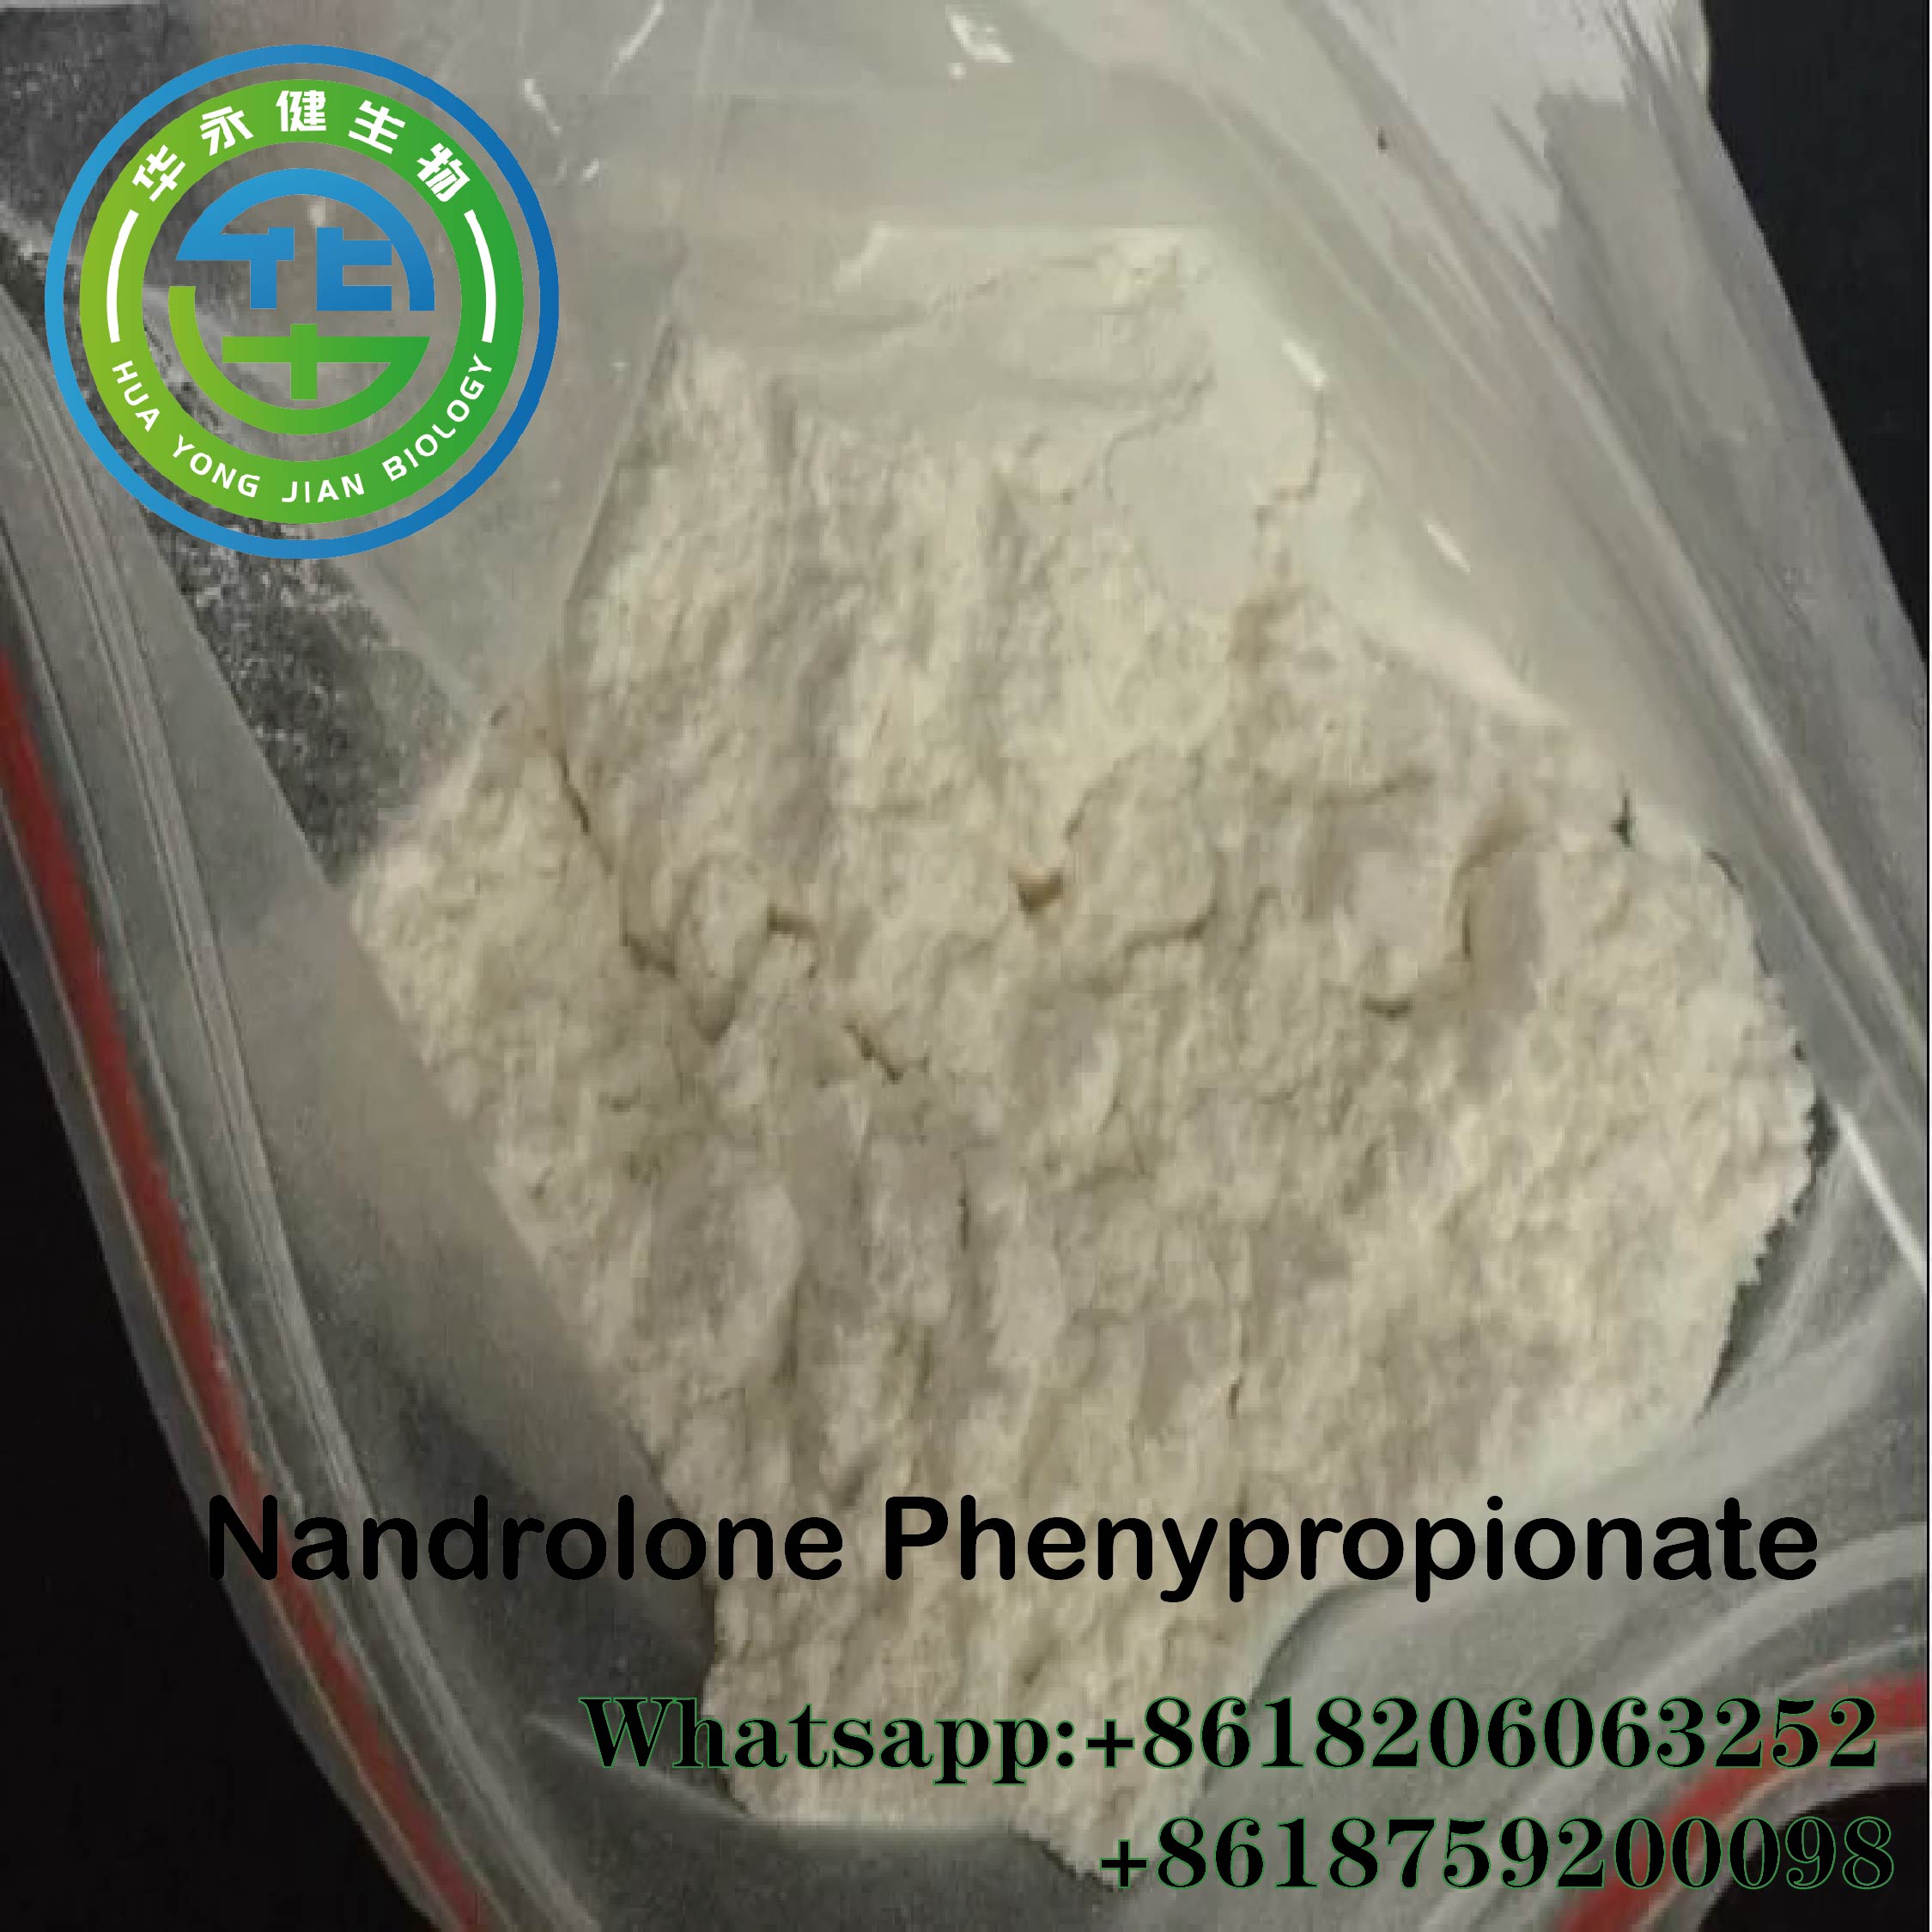 Safe and Injectable Nandrolone Phenylpropionate/Npp Durabolin Raw Powder for Anti-Aging